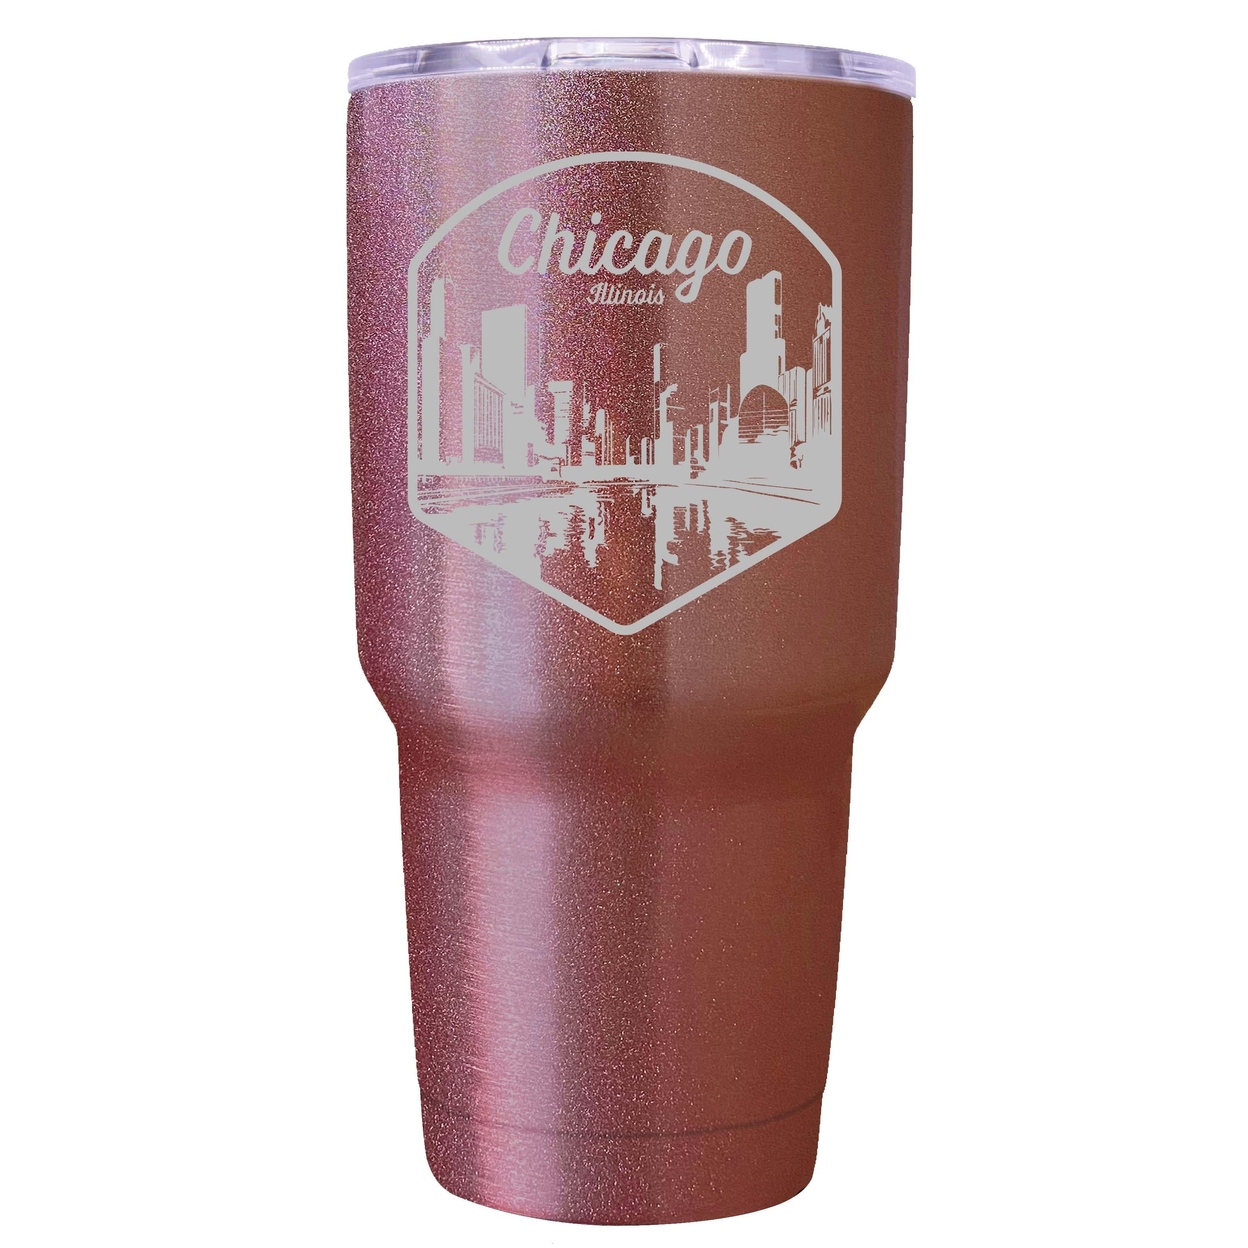 Chicago Illinois Souvenir 24 Oz Engraved Insulated Tumbler - Rose Gold,,4-Pack